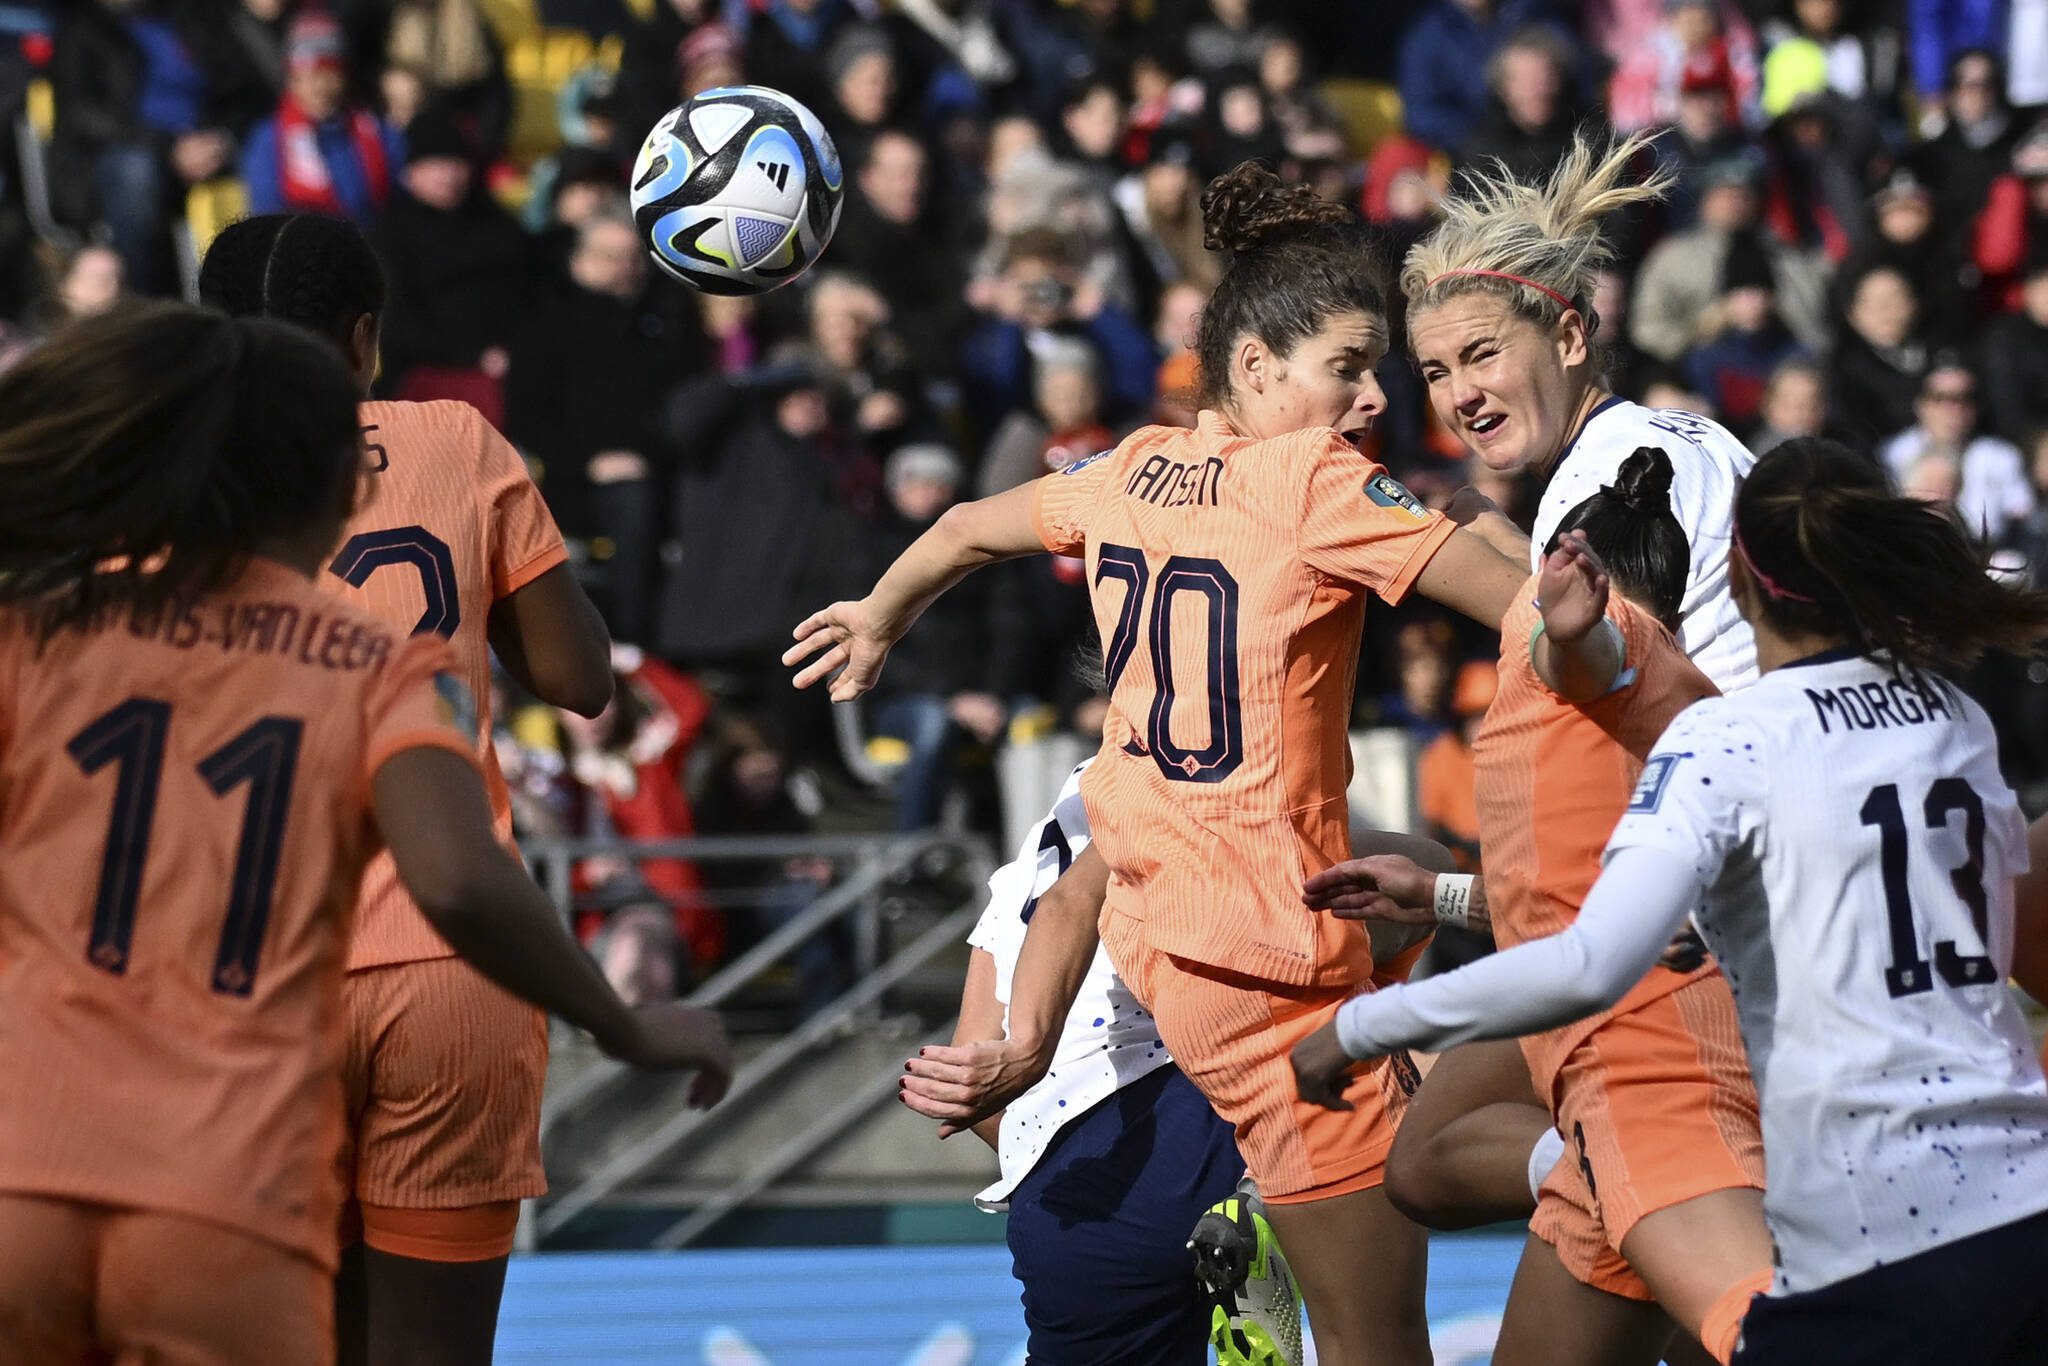 The United States’ Lindsey Horan (top right) heads the ball to score a goal during a Women’s World Cup match against the Netherlands on Thursday in Wellington, New Zealand. (AP Photo/Andrew Cornaga)